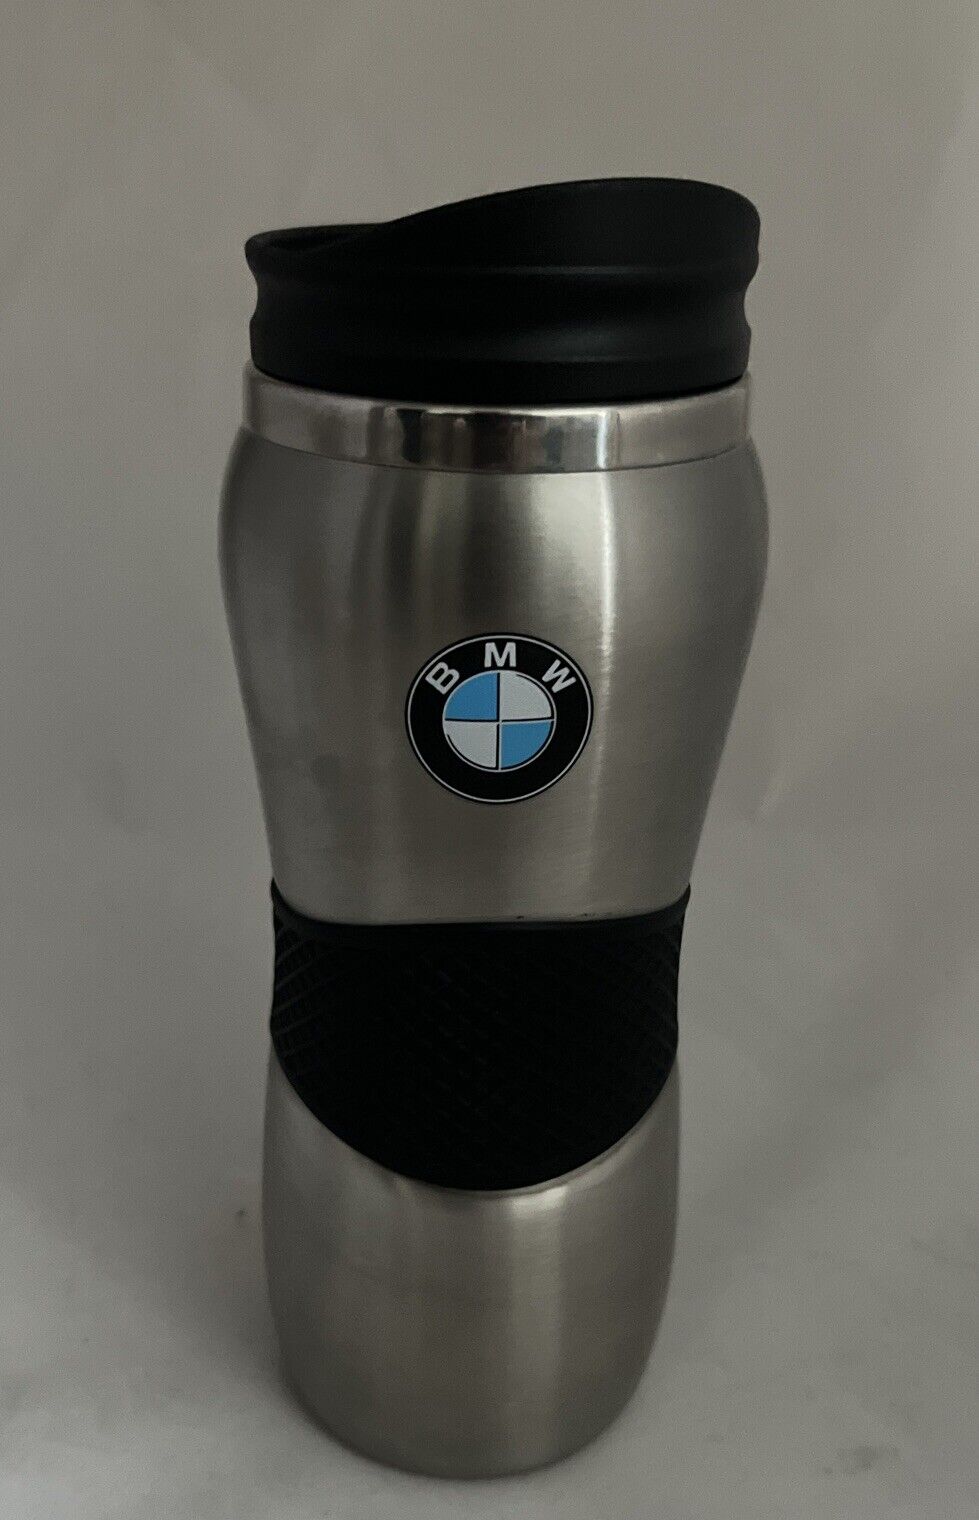 BMW Beverage Tumbler Barely Used Excellent Condition